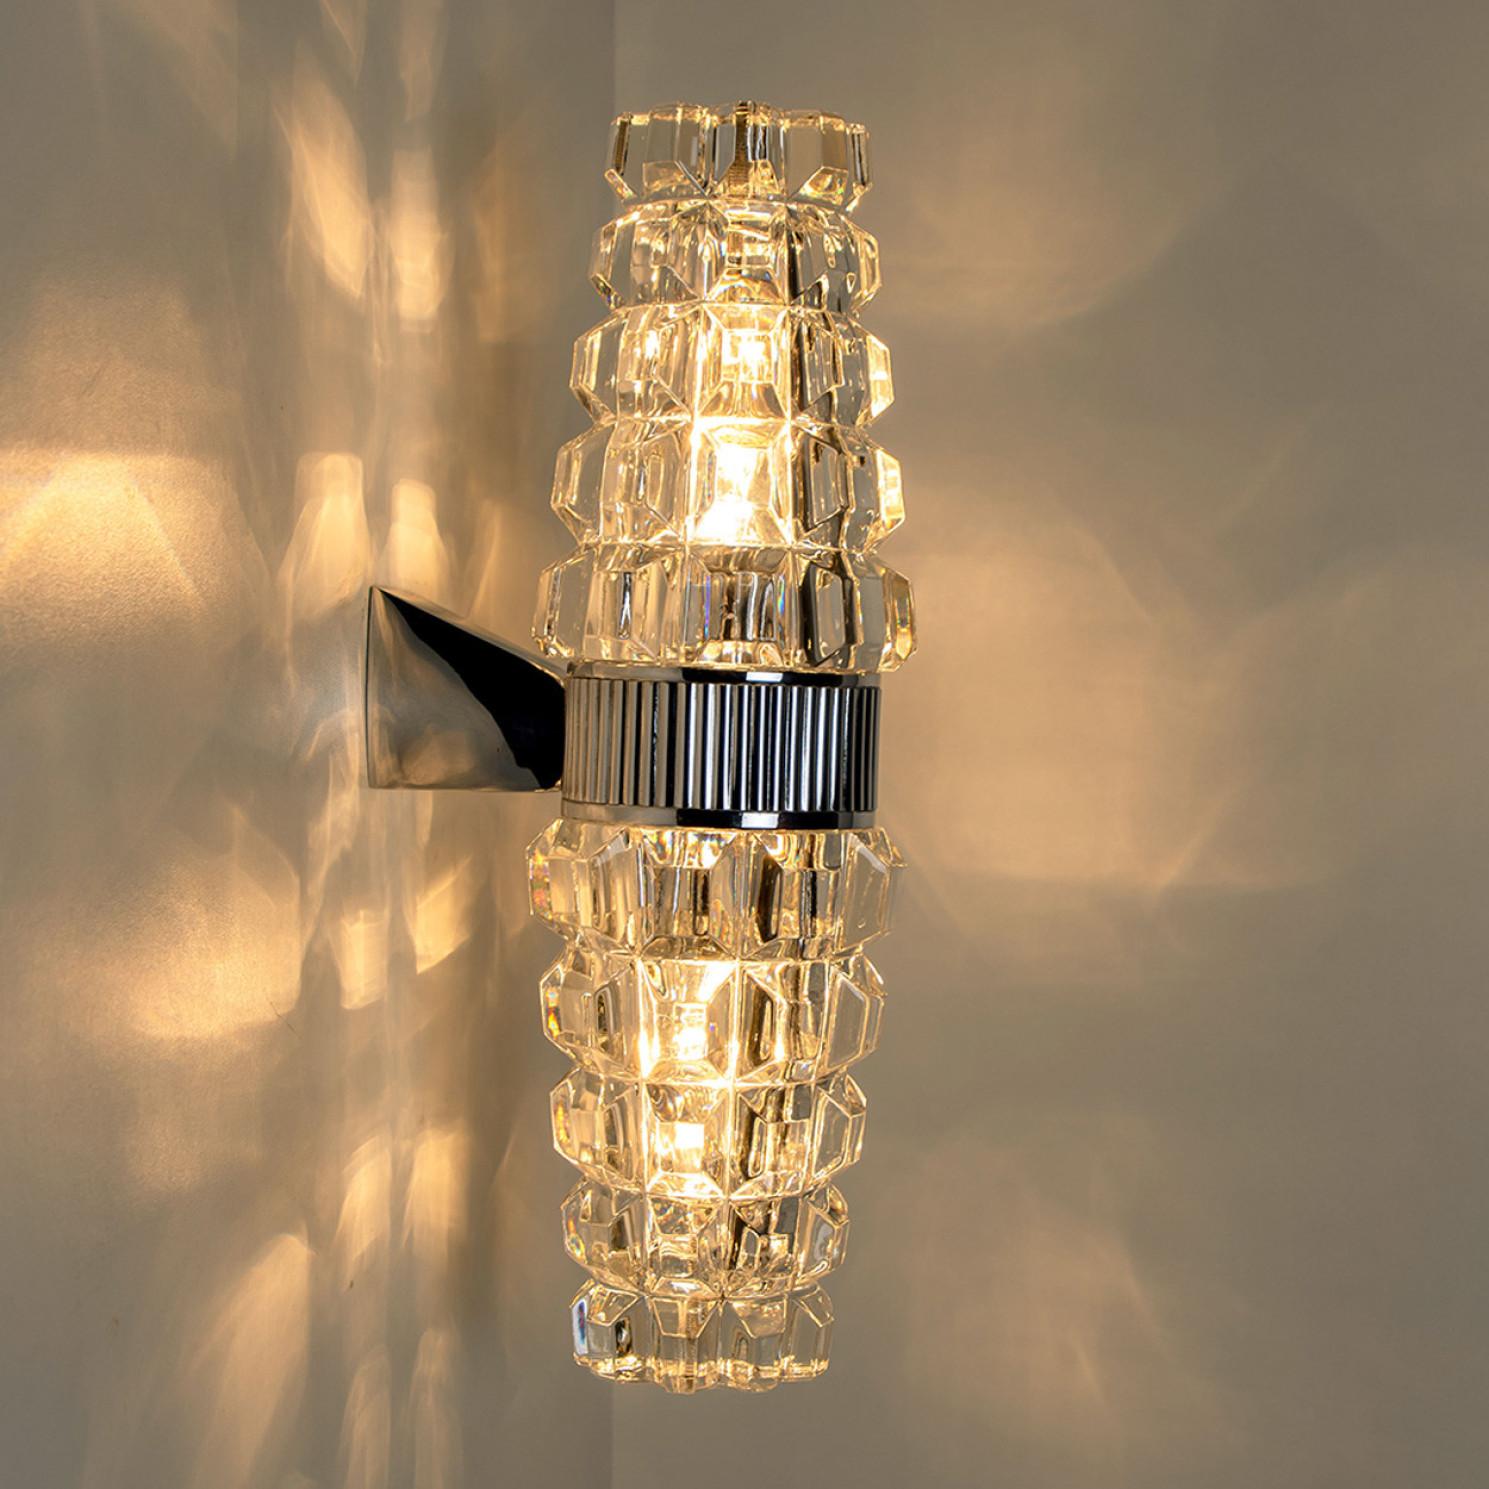 Hourglass Shaped Chrome Wallsconce, France, Europe, 1970s For Sale 7